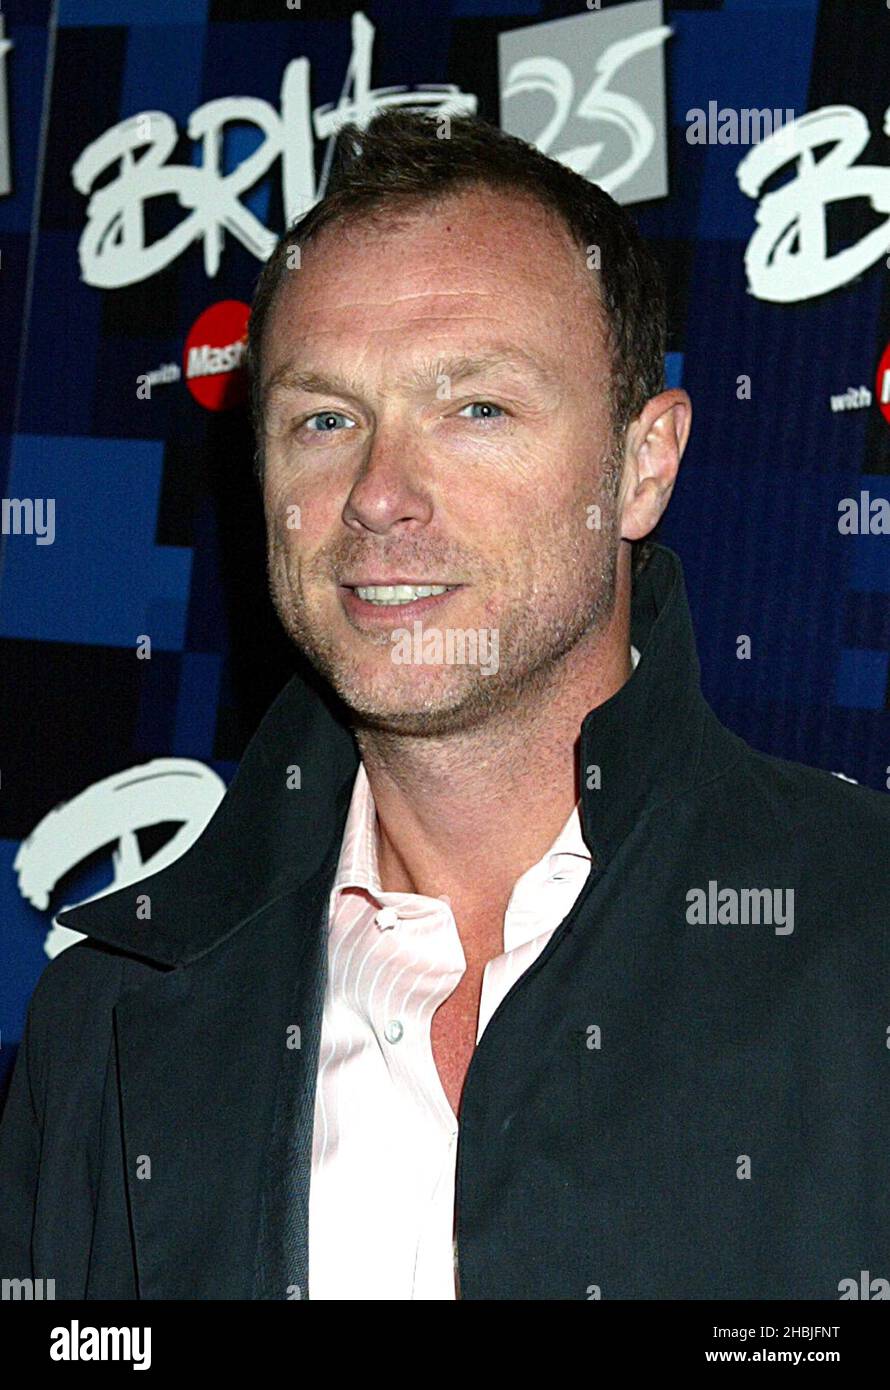 Gary Kemp attends the 'Brit Awards 2005 Shortlist Announcement' at the Park Lane Hotel on January 10, 2005 in London. Head shot Stock Photo